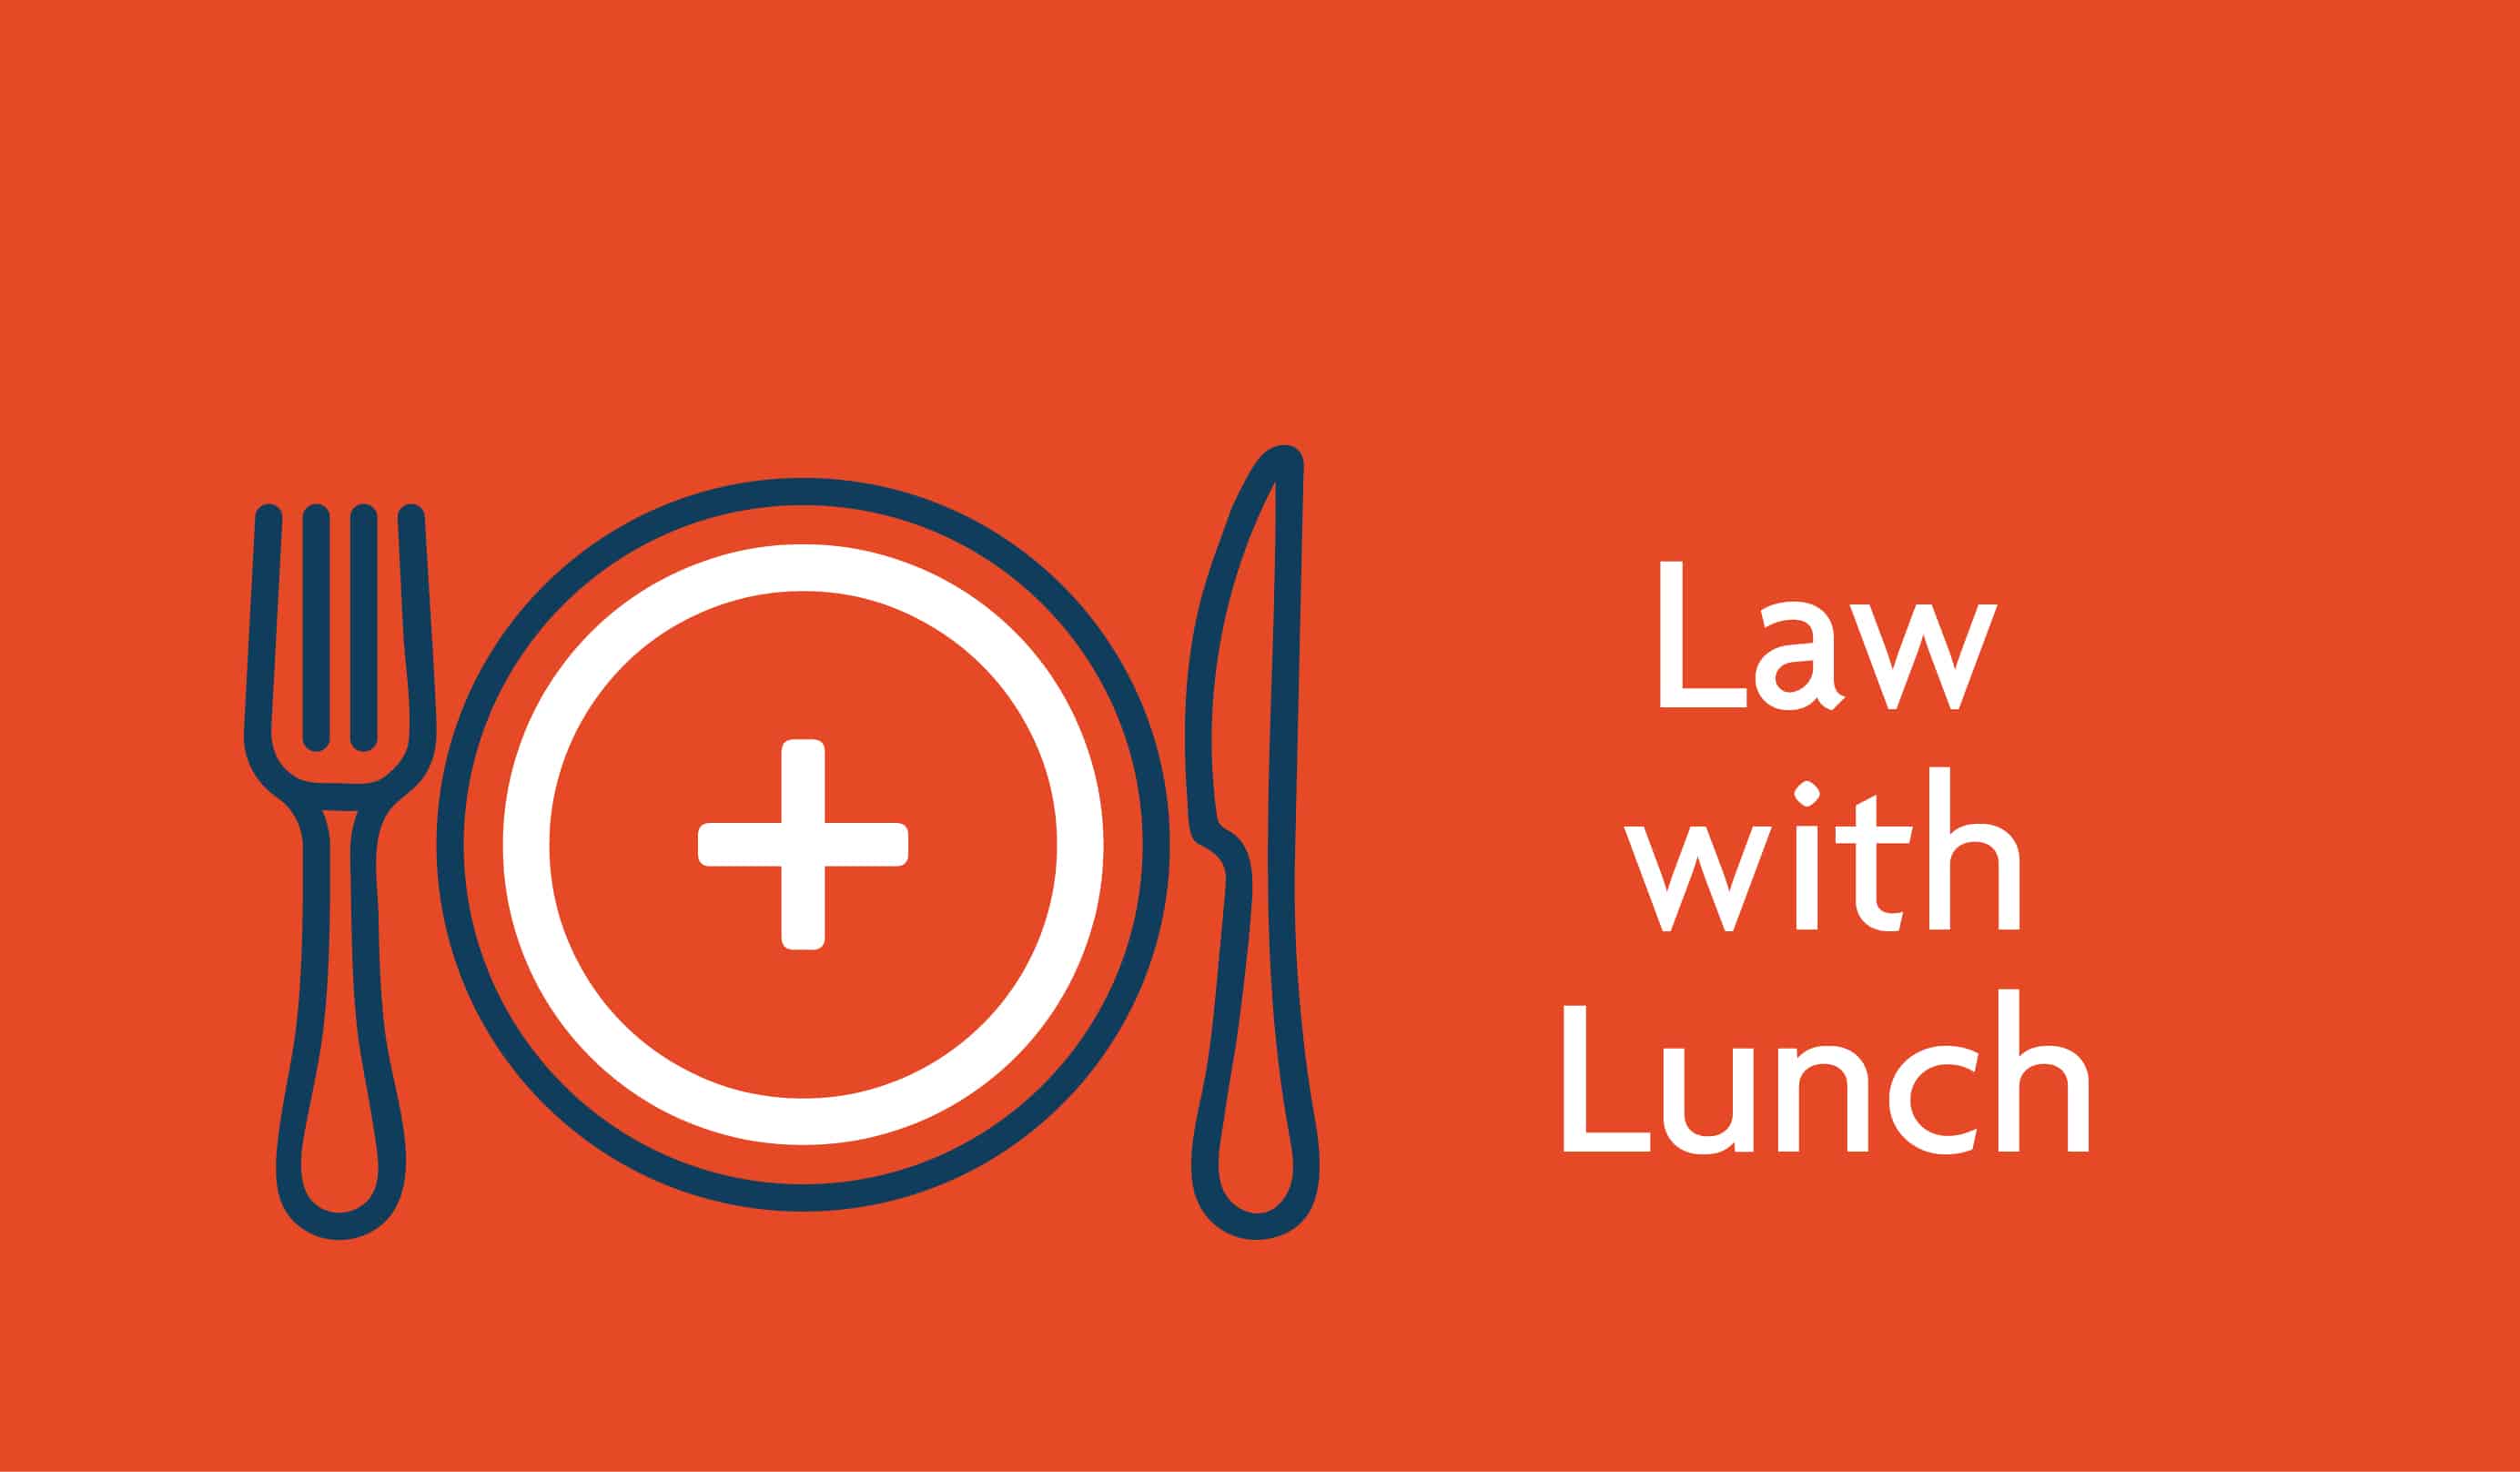 Clinical Negligence | ‘Law with Lunch’ Webinar Series | 11 May 2022